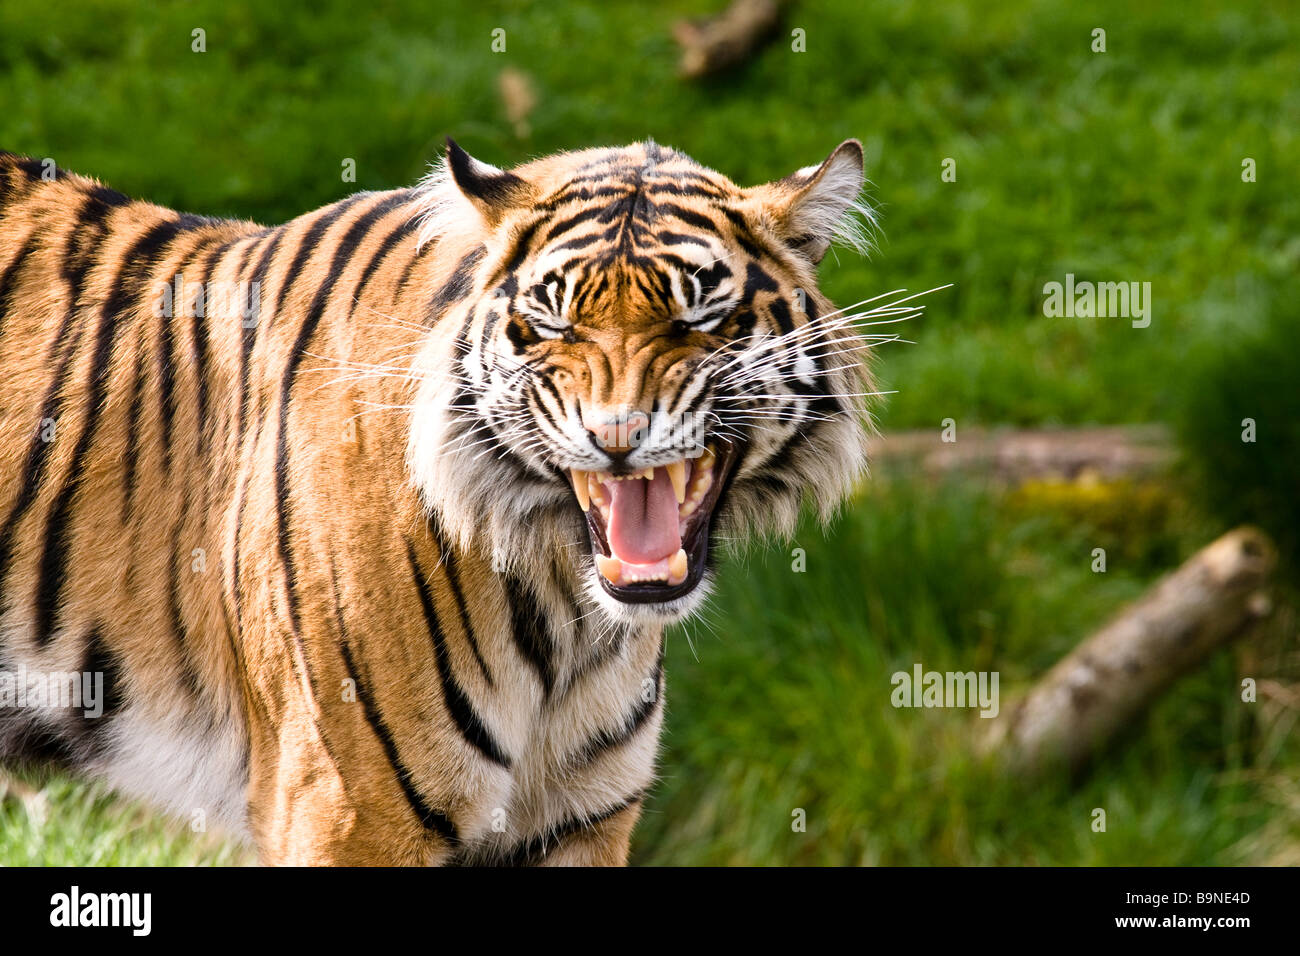 tiger growling and showing teeth Stock Photo